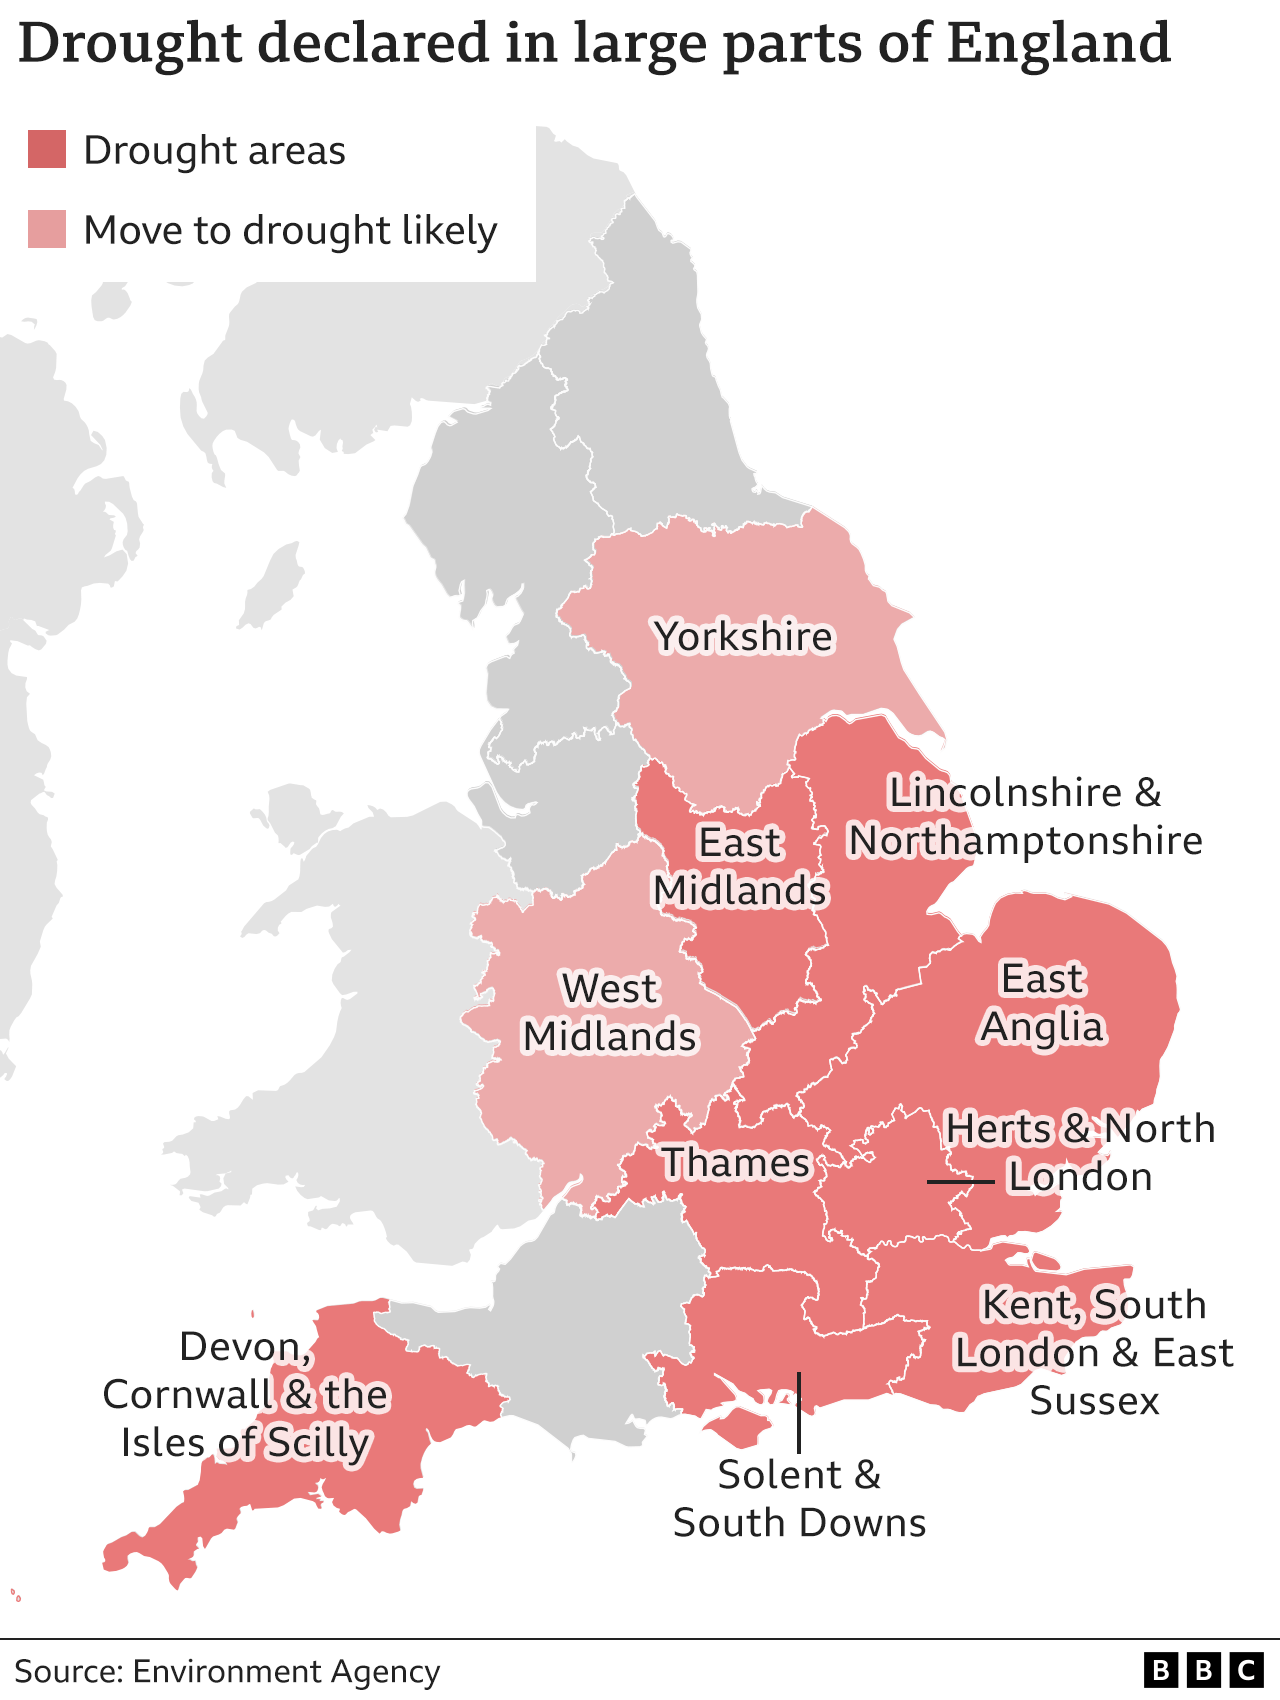 A map showing areas affected by the drought